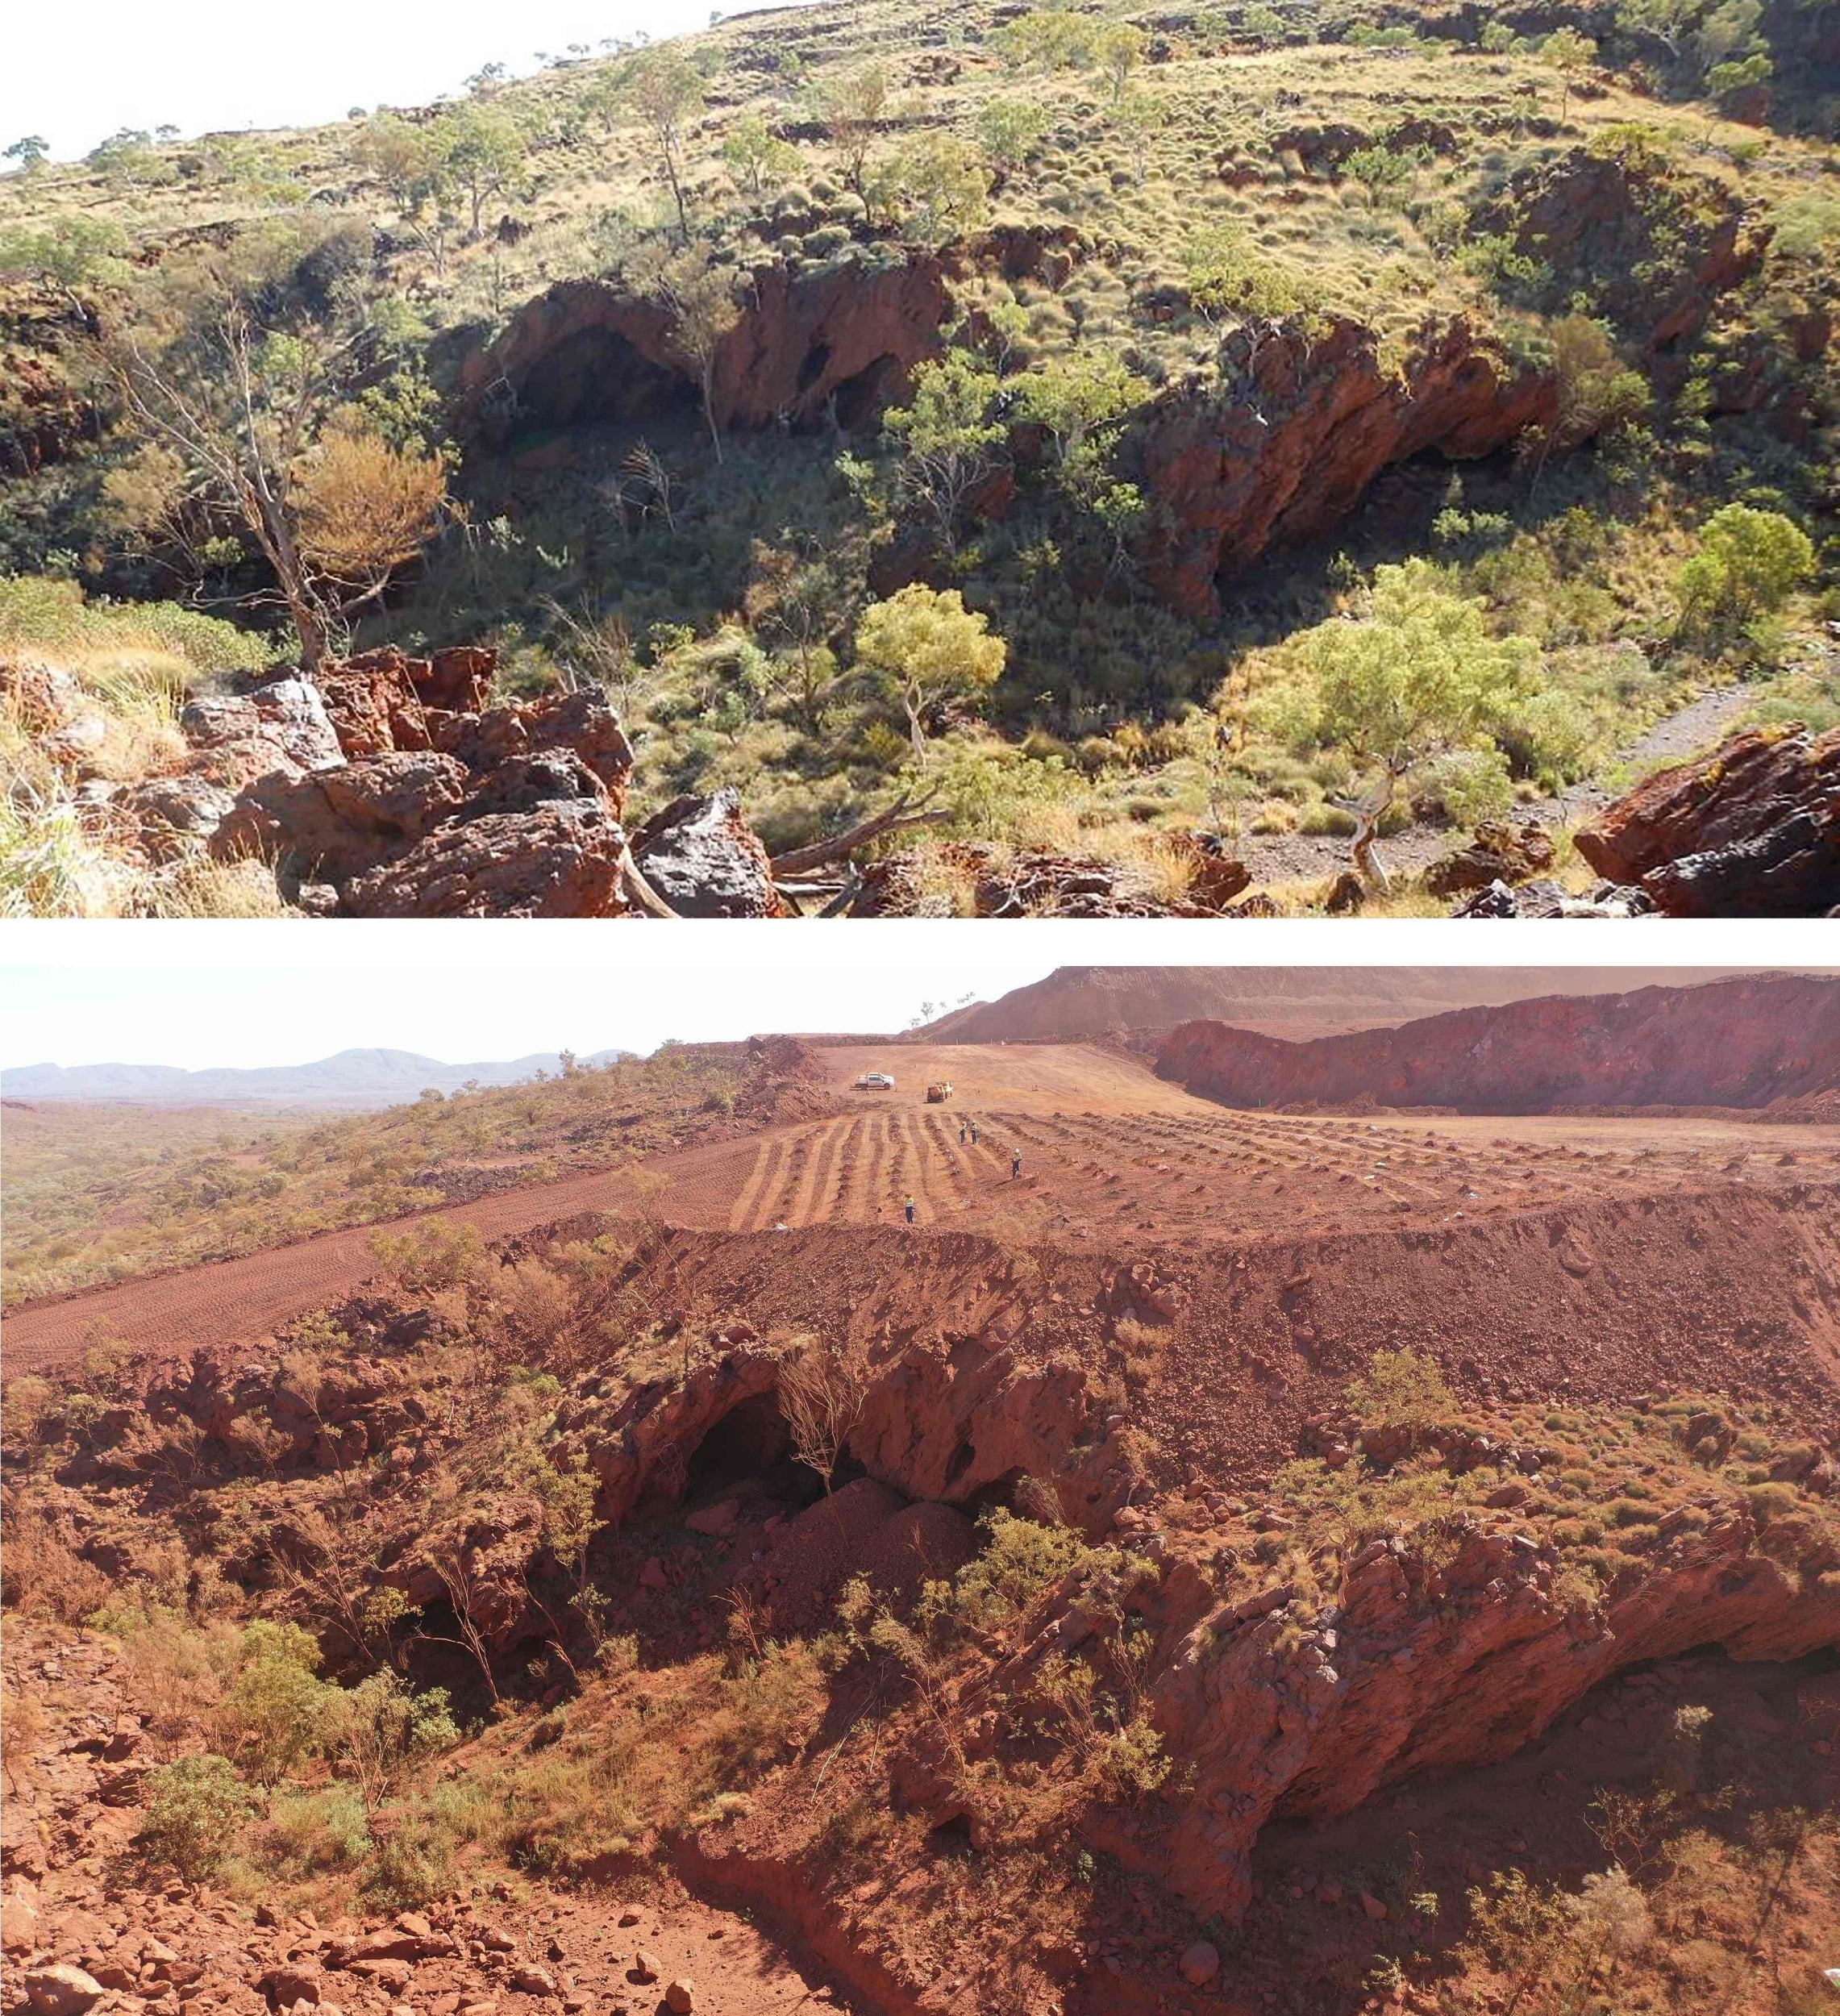 Photos released by the PKKP Aboriginal Corporation show Juukan Gorge in Western Australia on June 2, 2013 (top) and how it was on May 15, 2020, after mining activity but before the blasts which destroyed the ancient caves